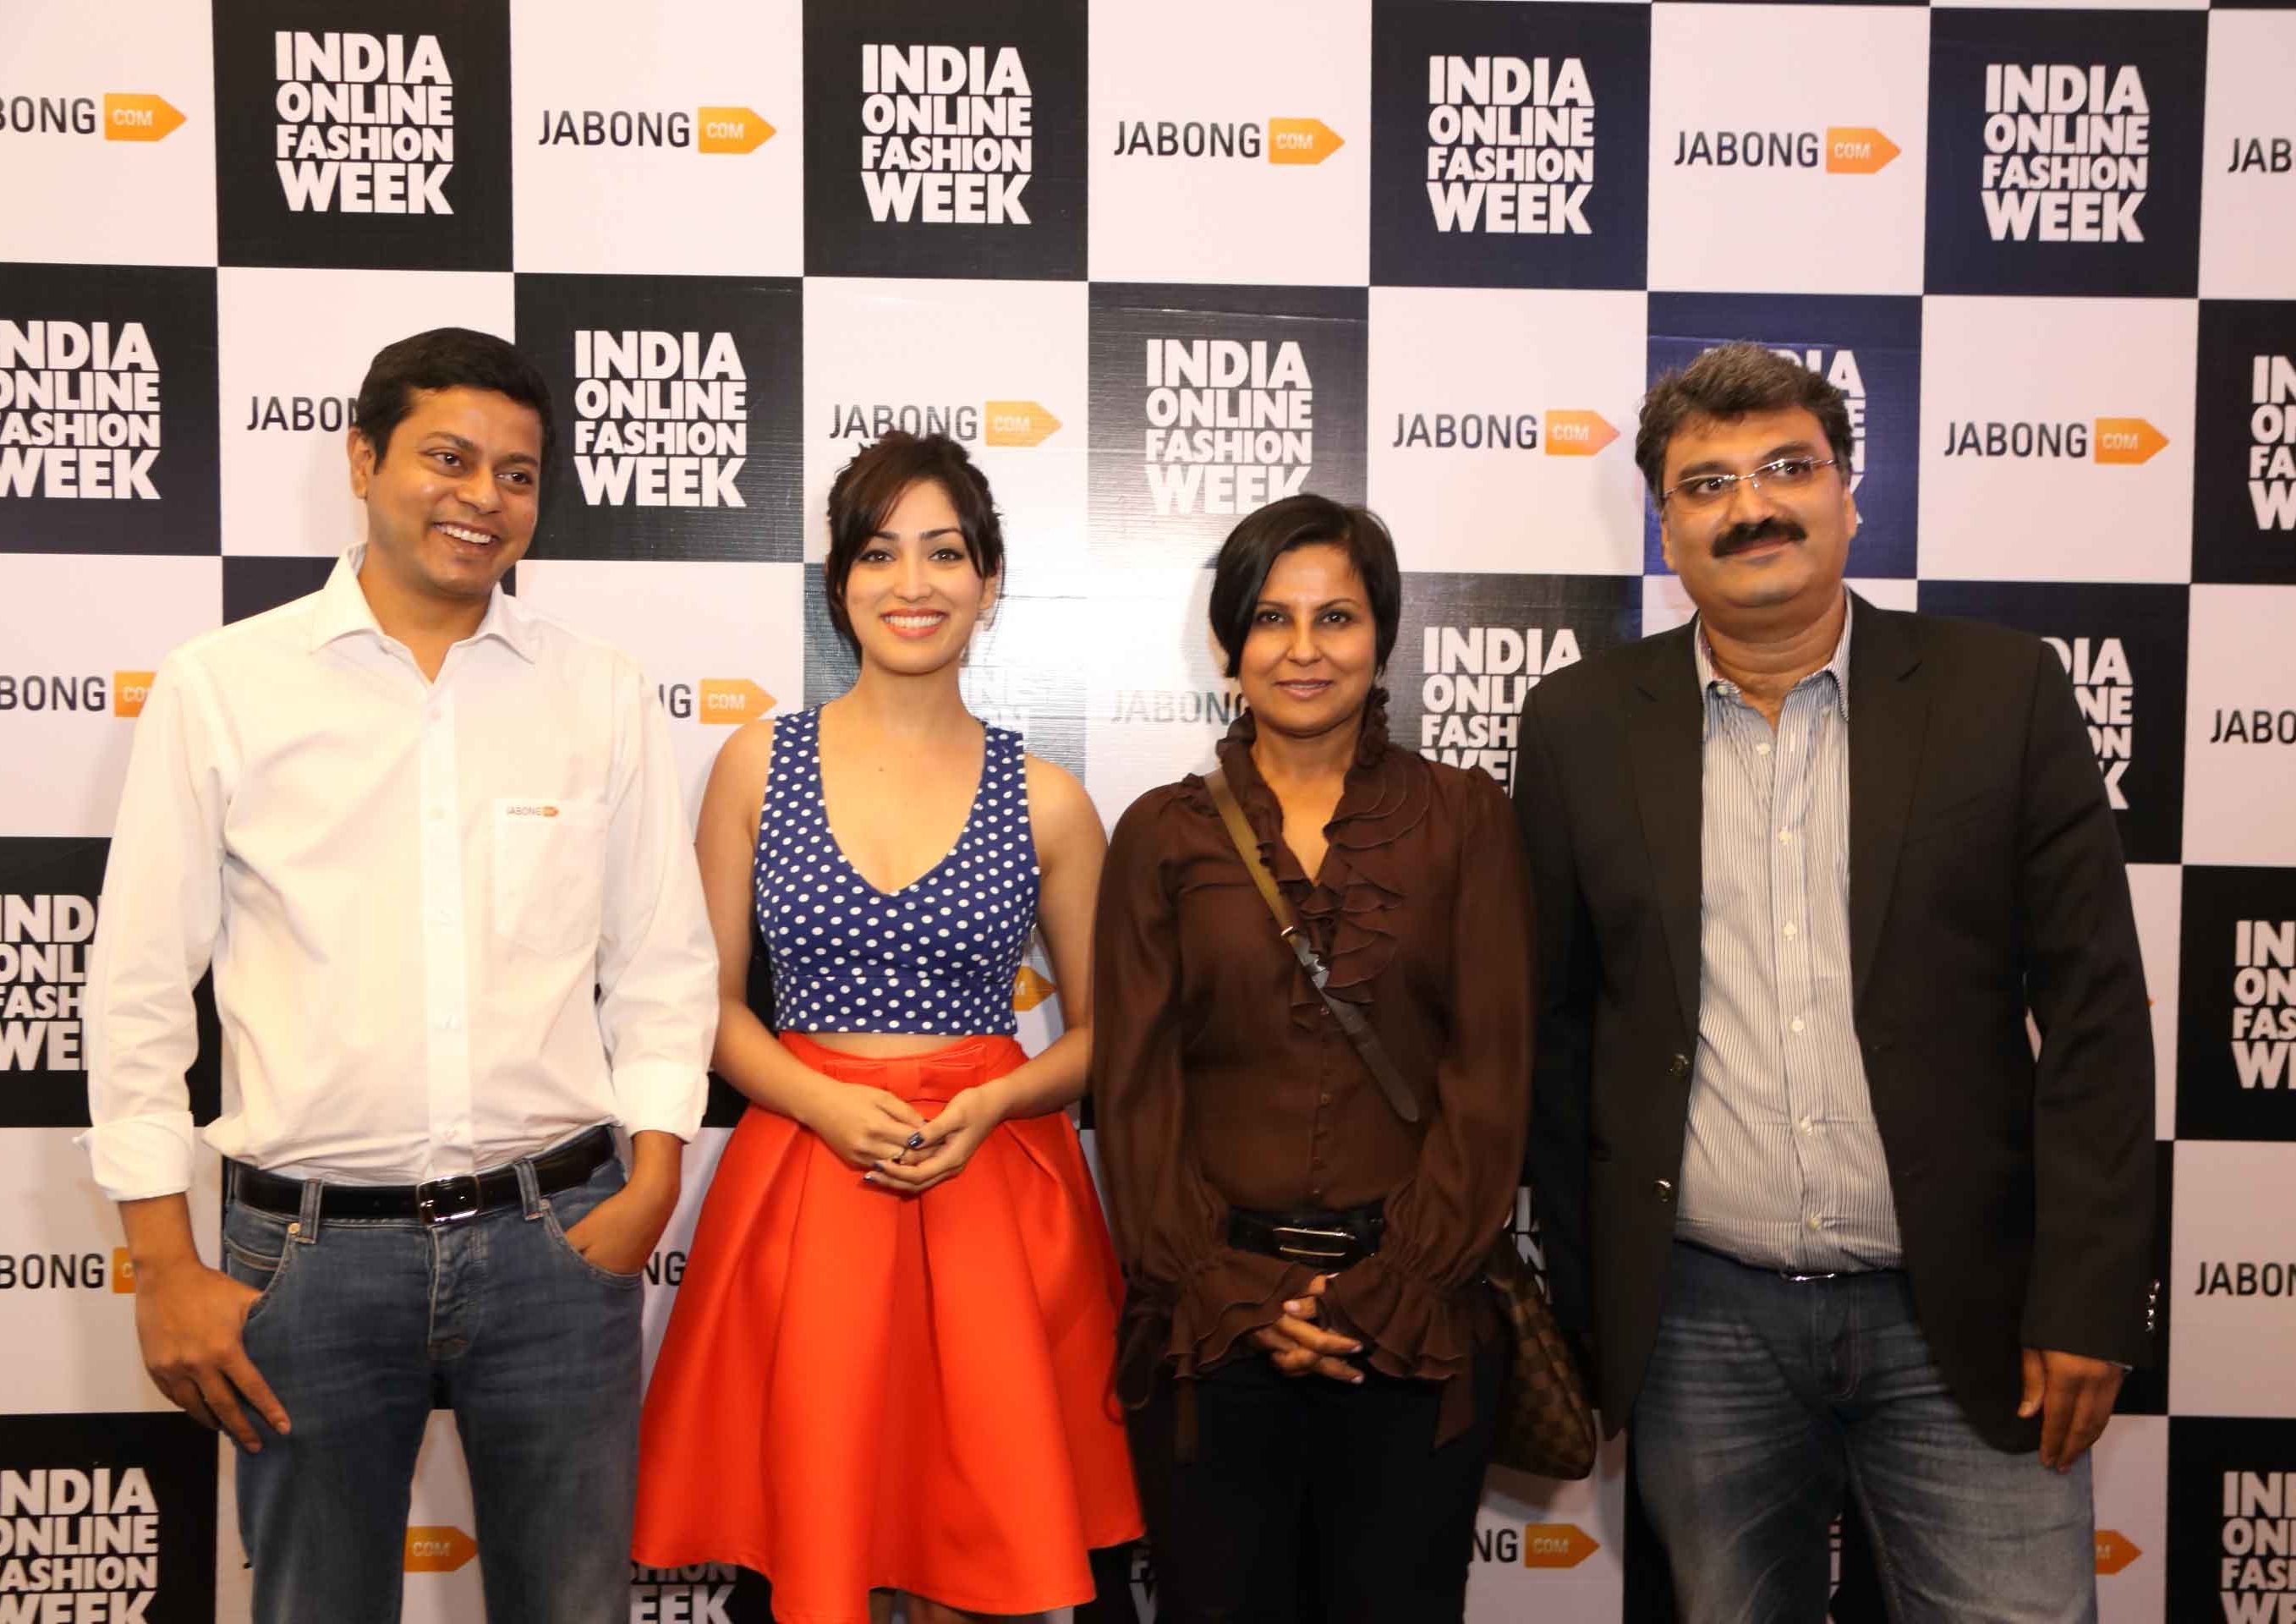 (L to R)Praveen Sinha,Co-Founder and MD,Jabong.com, Celebrity Mentor for Indian Online Fashion Week, Yami Gautam, Rashmi Virmani,Show Director and Arun Mehra, CEO, Talenthouse India